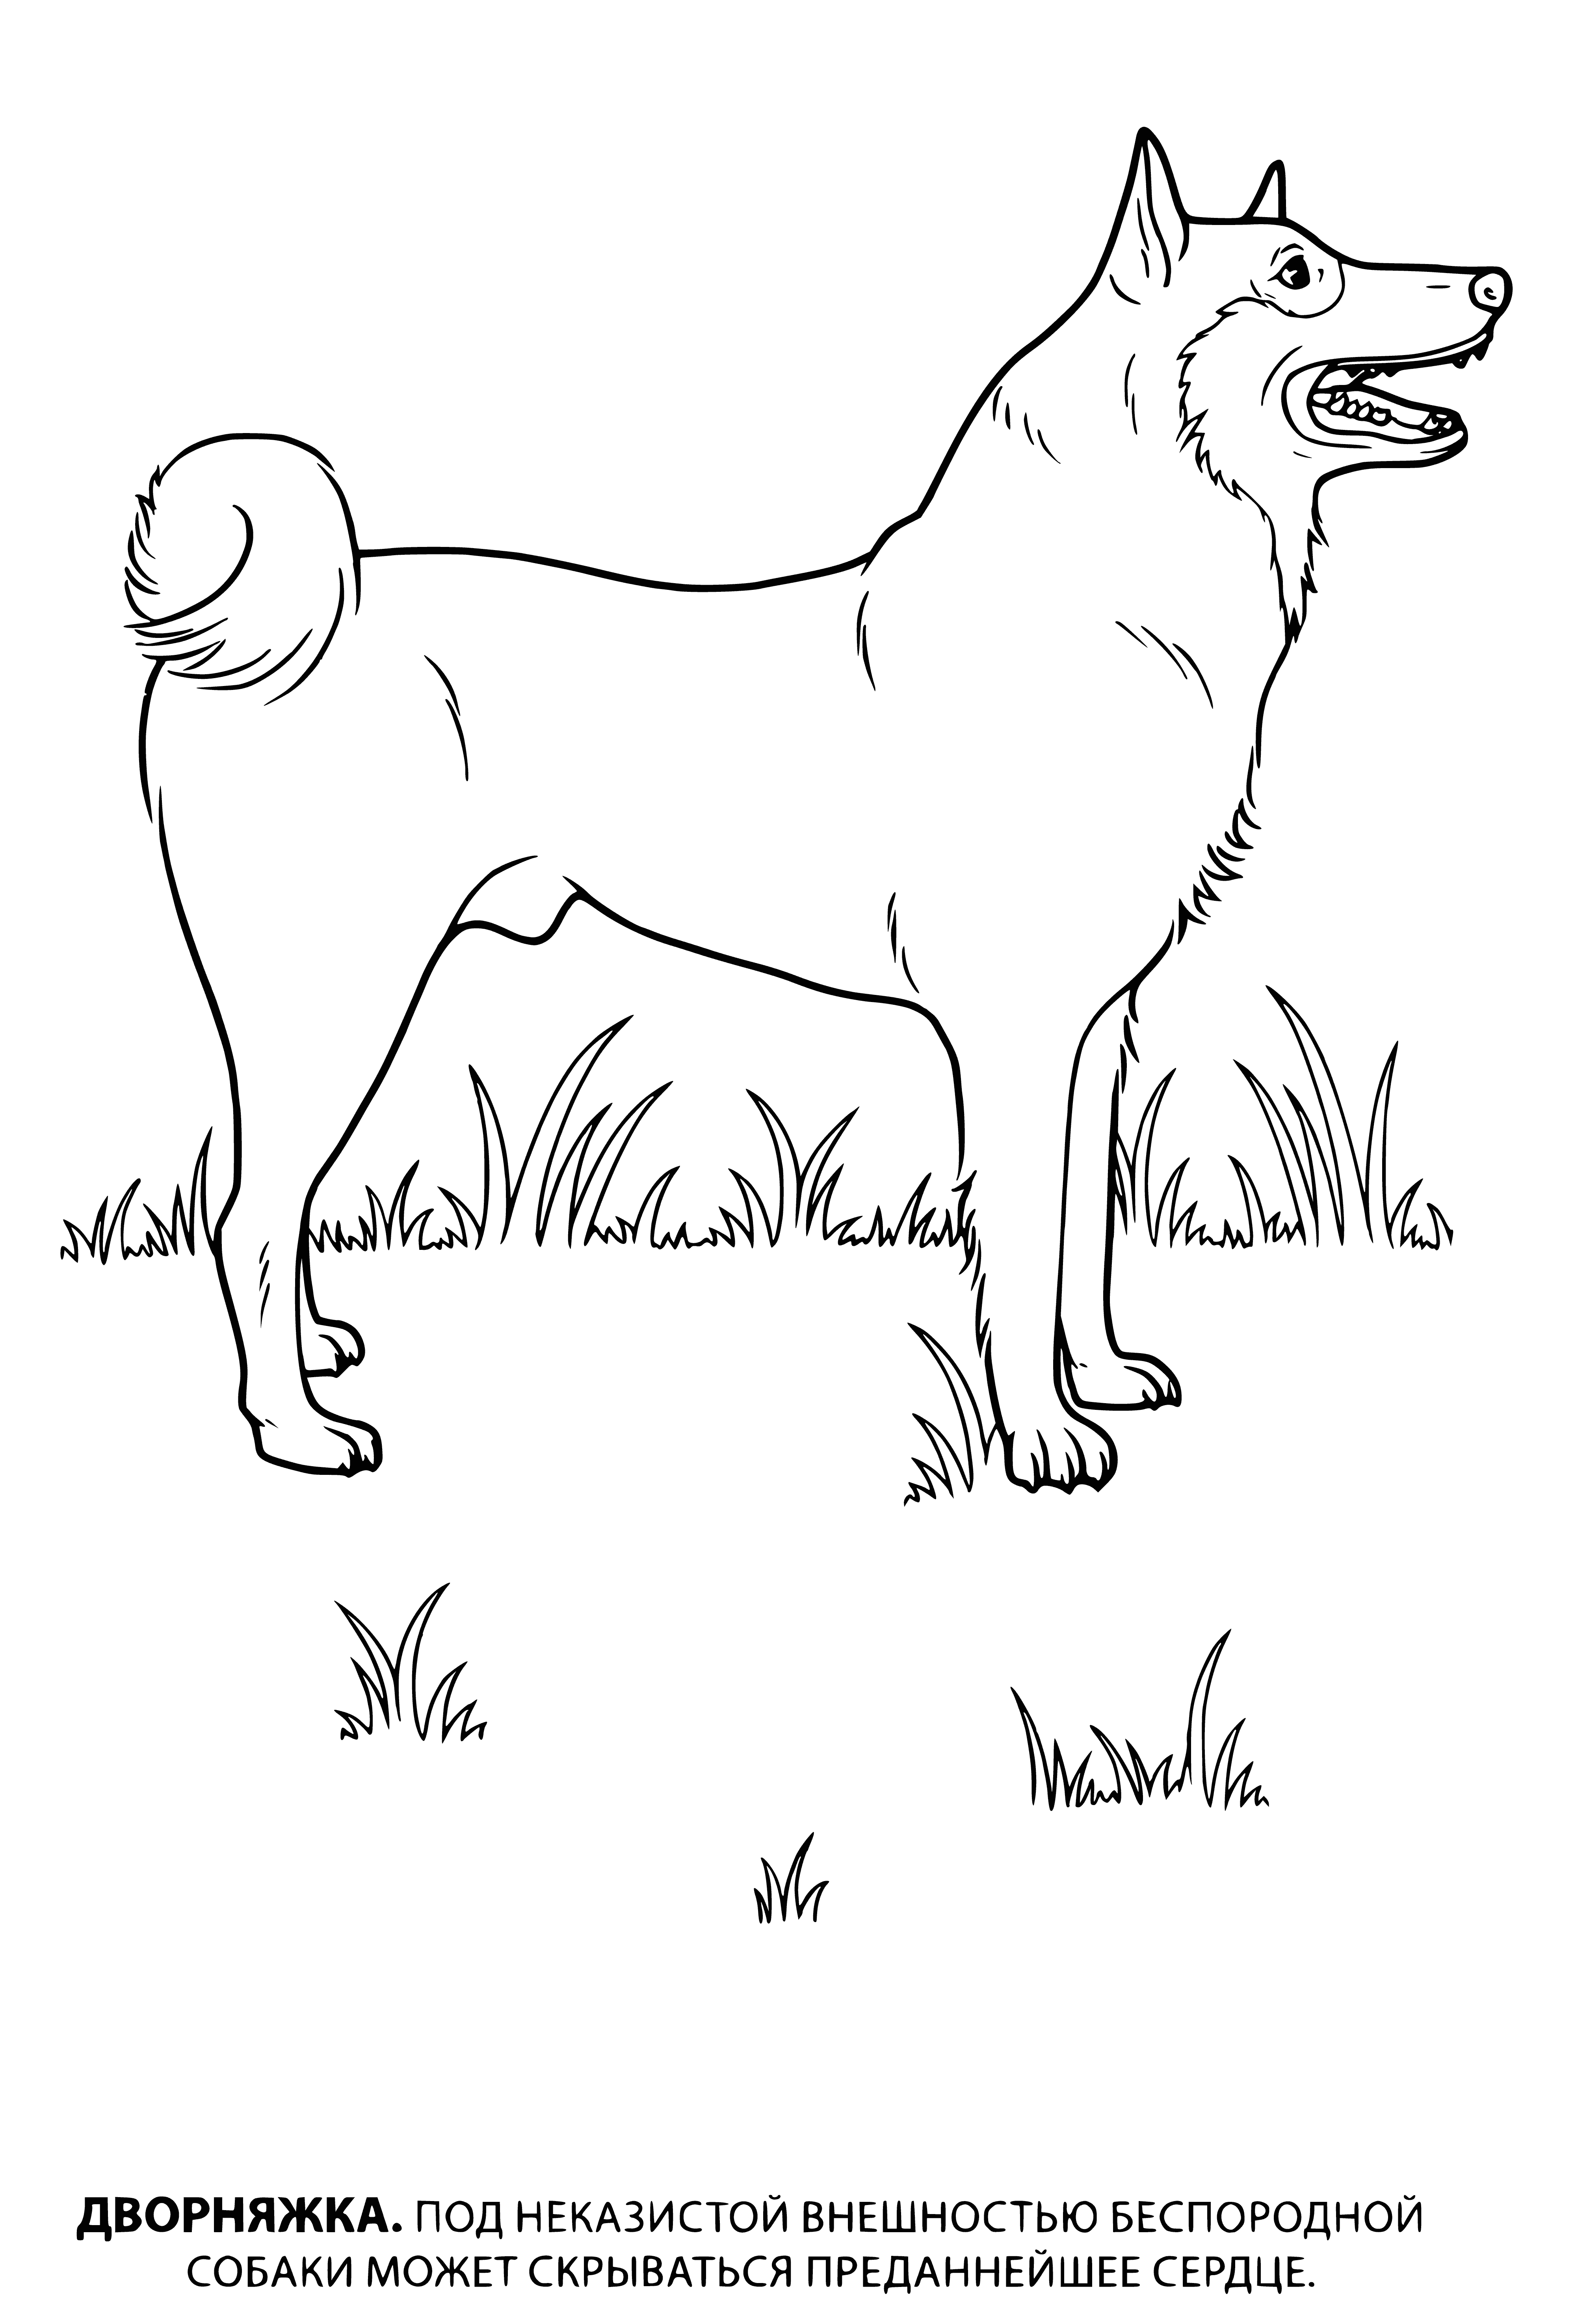 coloring page: 4 dogs of different colors & breeds. Standing & one sitting, looking happy & well cared for.